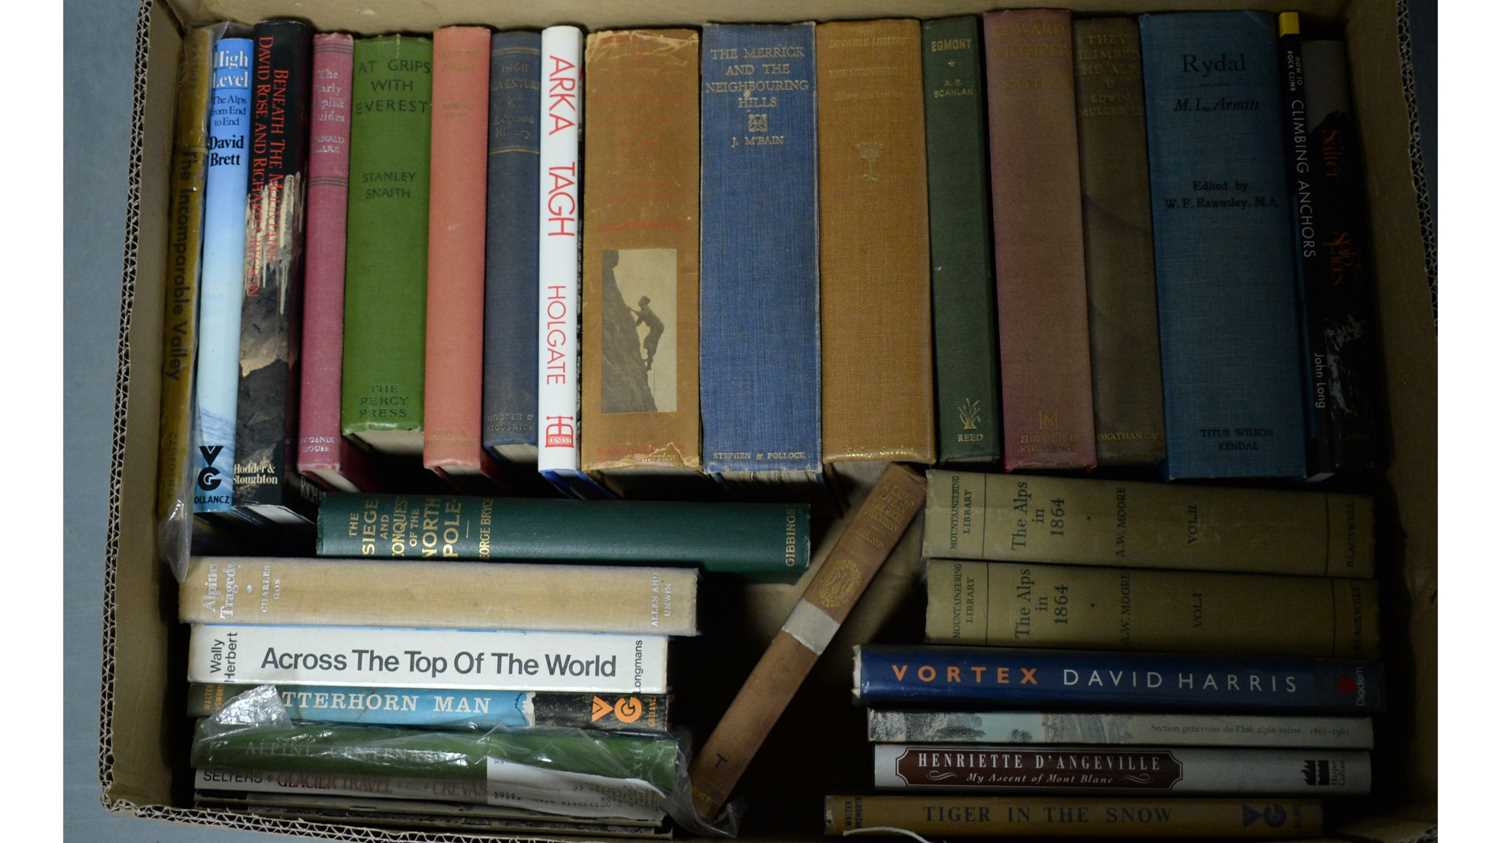 A selection of hardback and other books, primarily relating to mountaineering